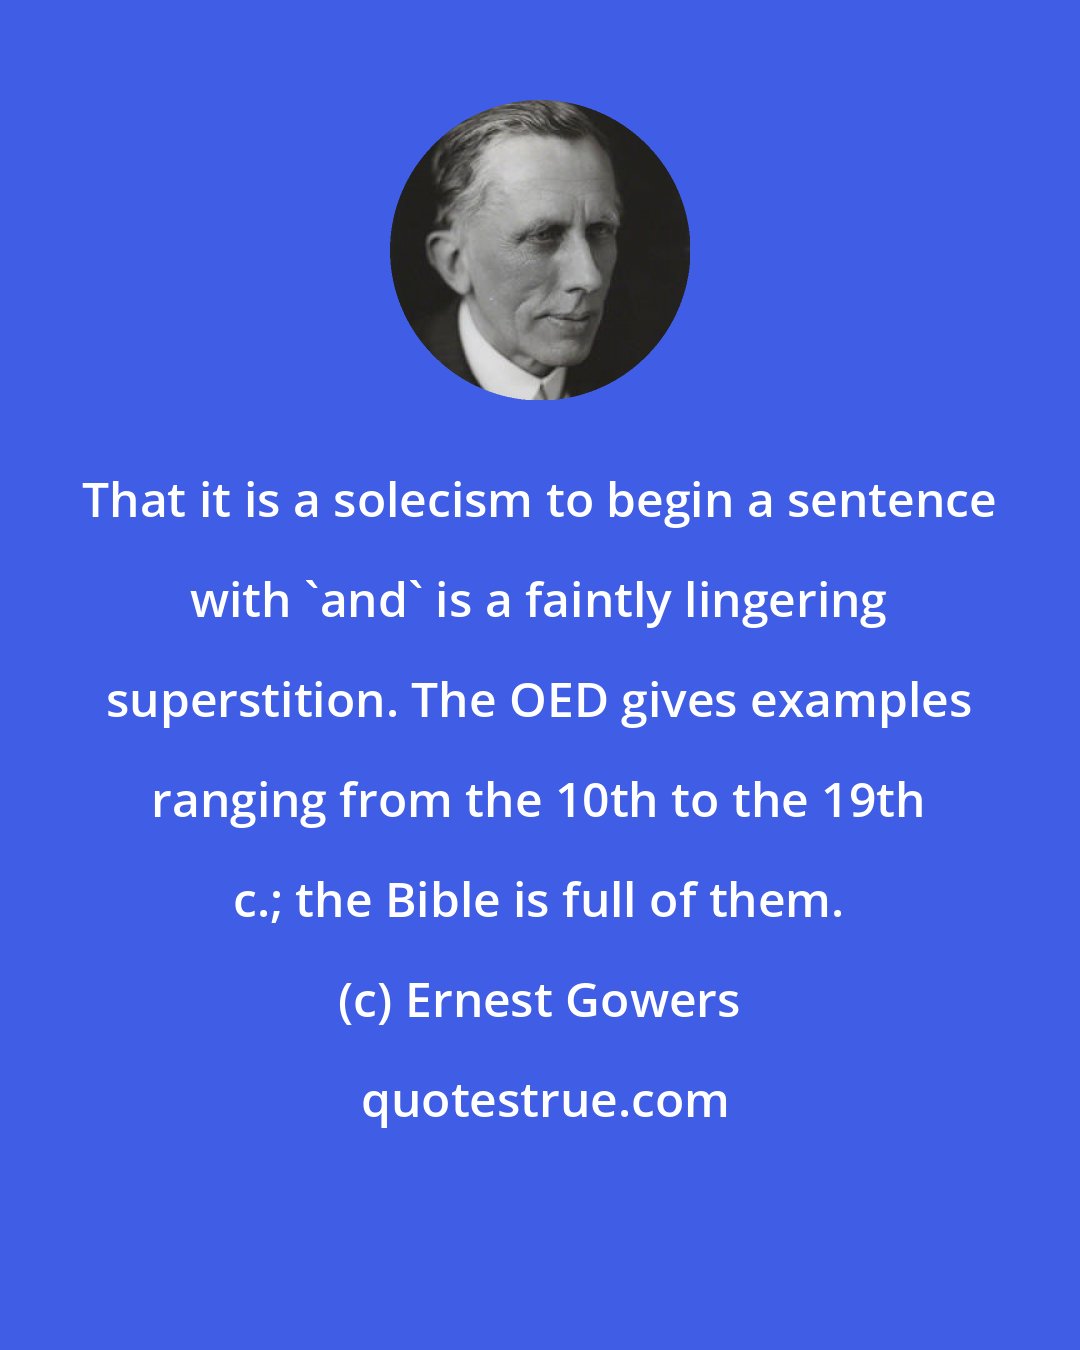 Ernest Gowers: That it is a solecism to begin a sentence with 'and' is a faintly lingering superstition. The OED gives examples ranging from the 10th to the 19th c.; the Bible is full of them.